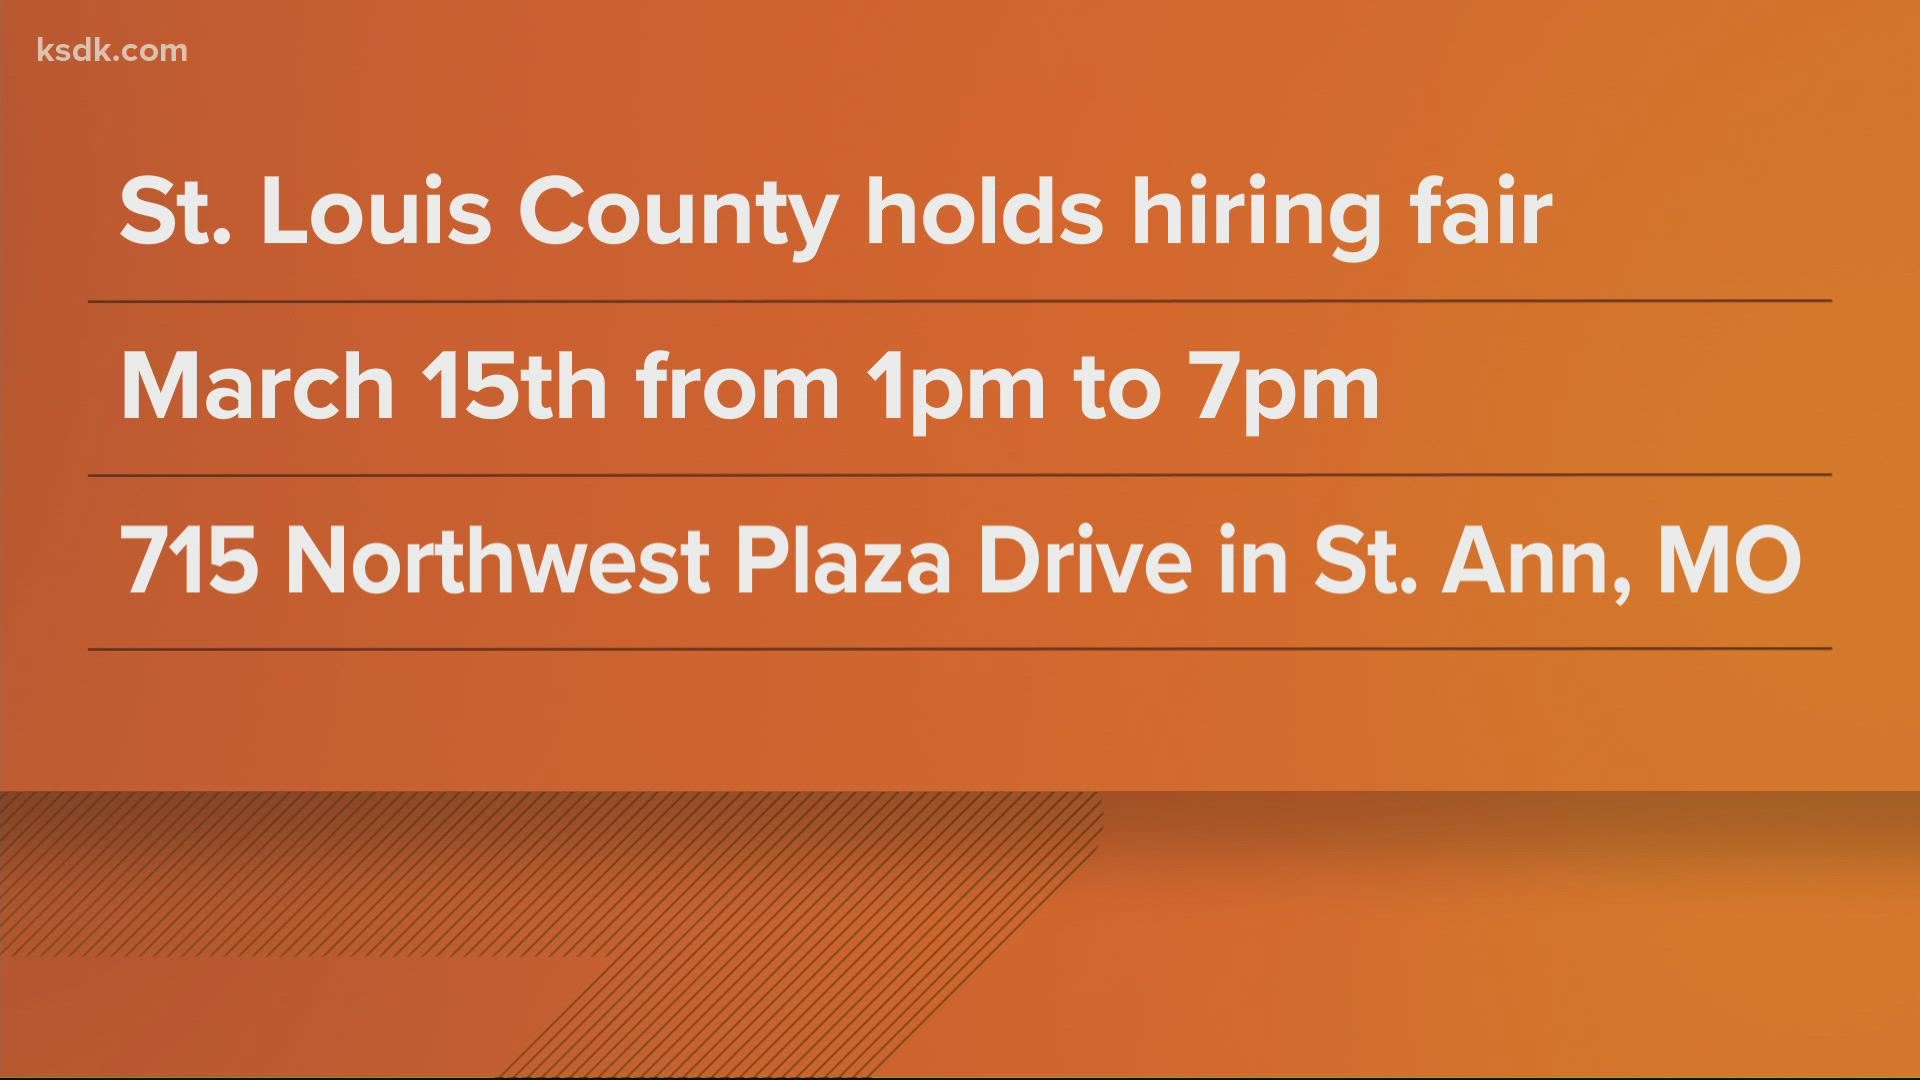 St. Louis County needs to fill 90 open positions and the City of St. Louis has openings for a job that will have you outside enjoying the weather all summer long.